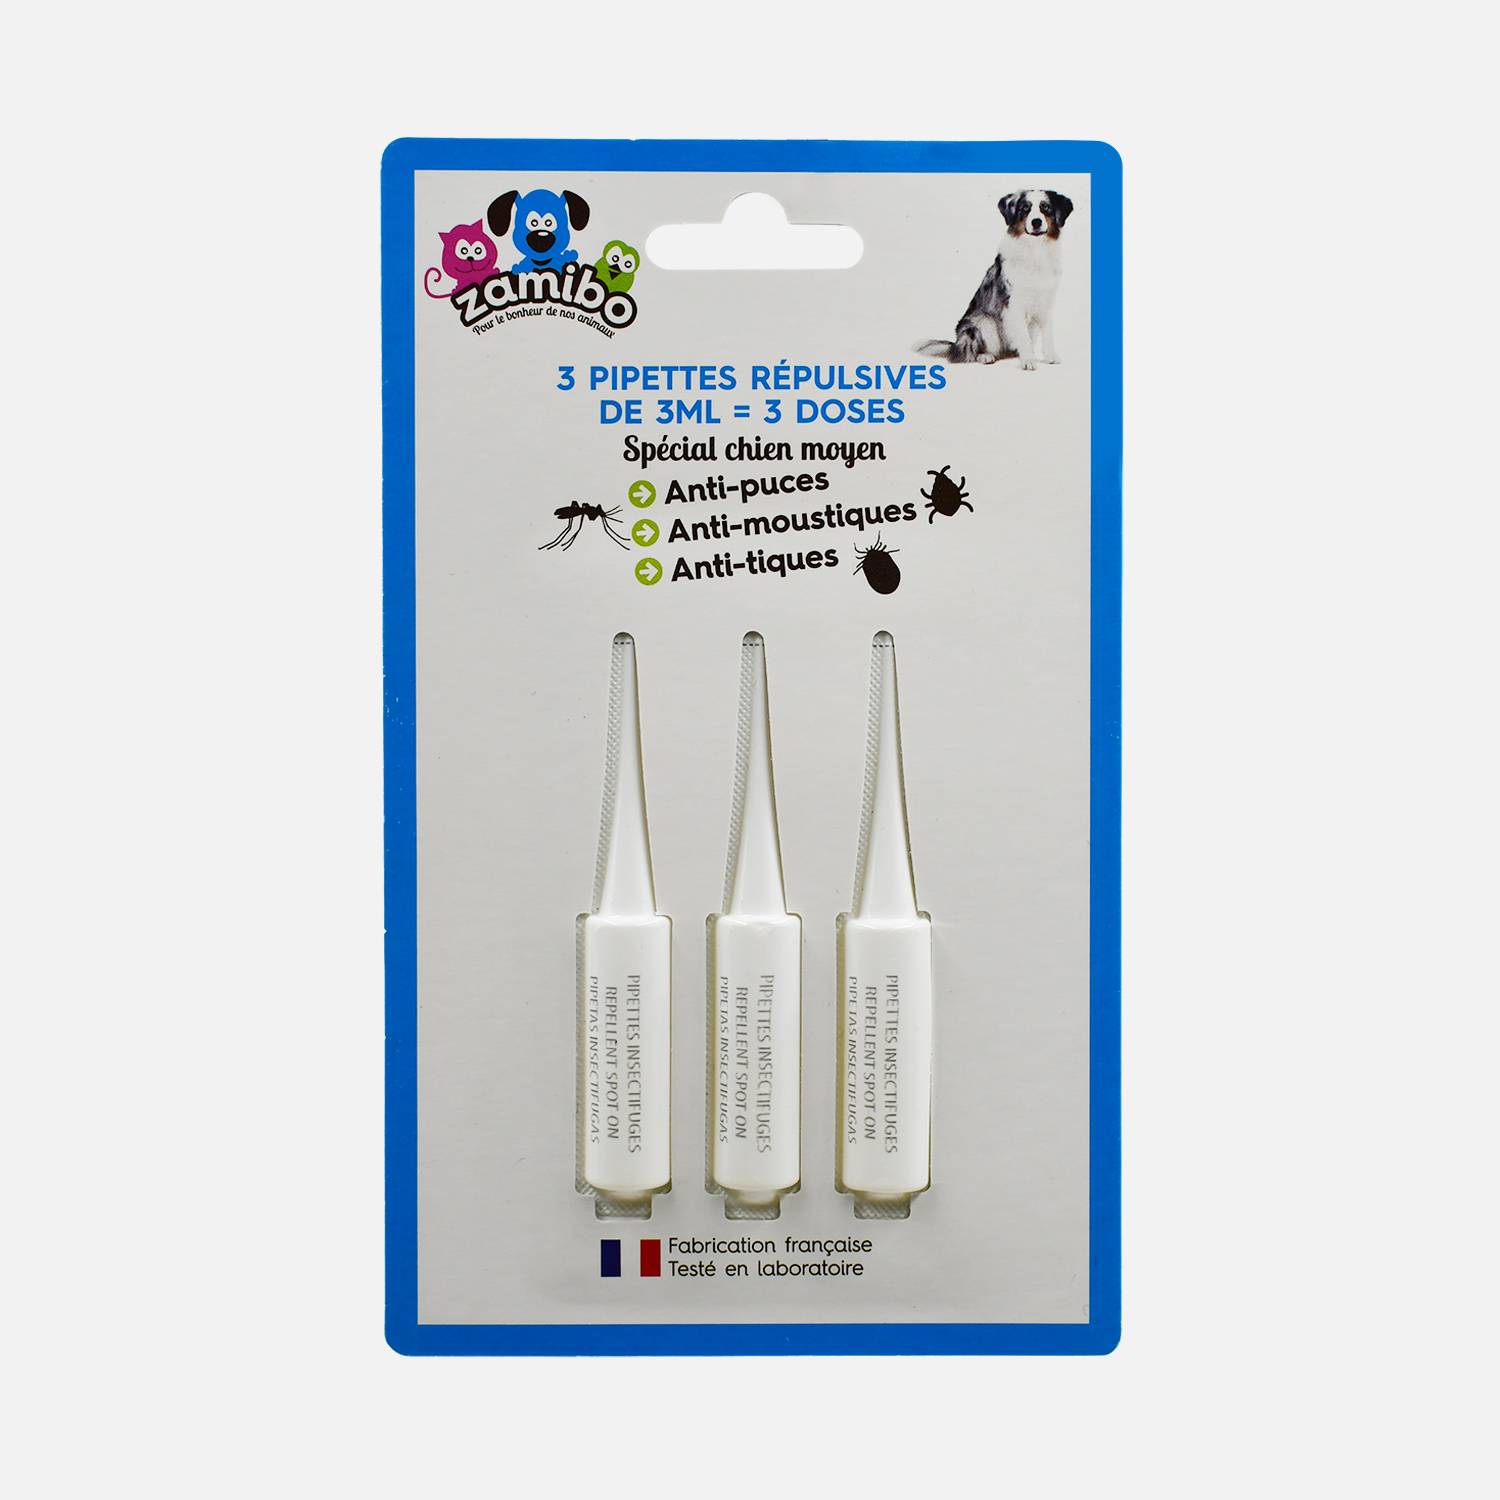 3 pipettes répulsives antiparasitaire pour chien moyen, made in France Photo1